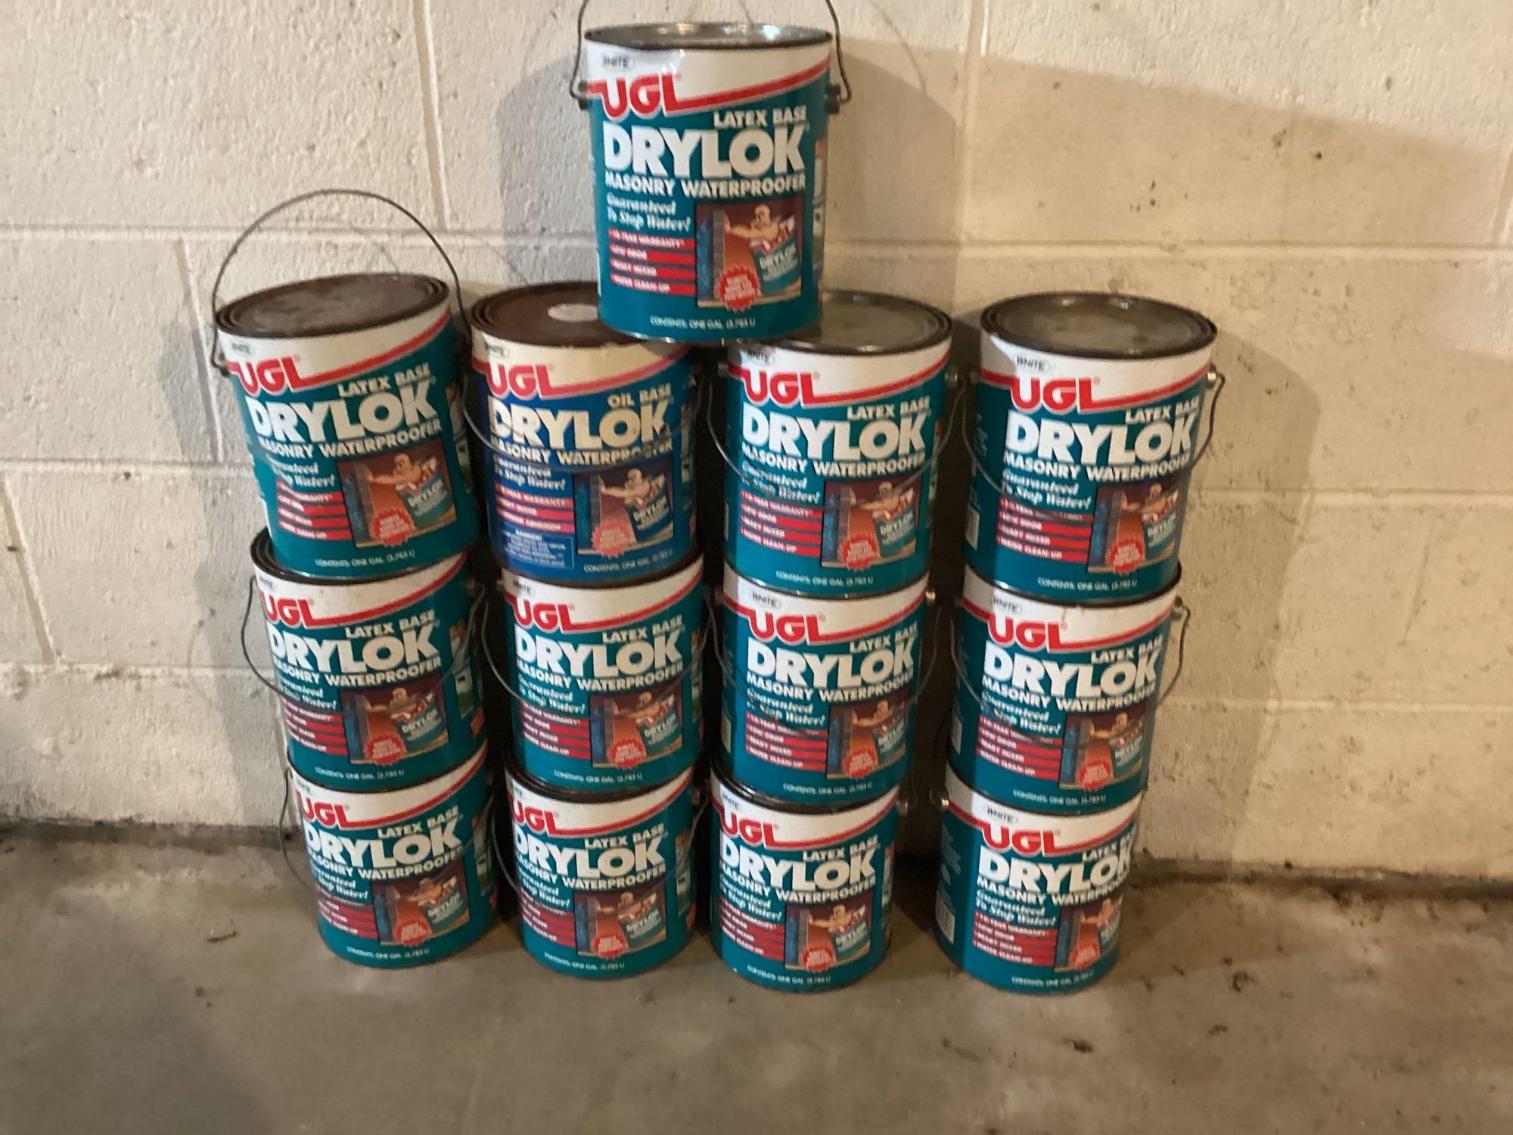 Image for 13 Gallons of Drylok